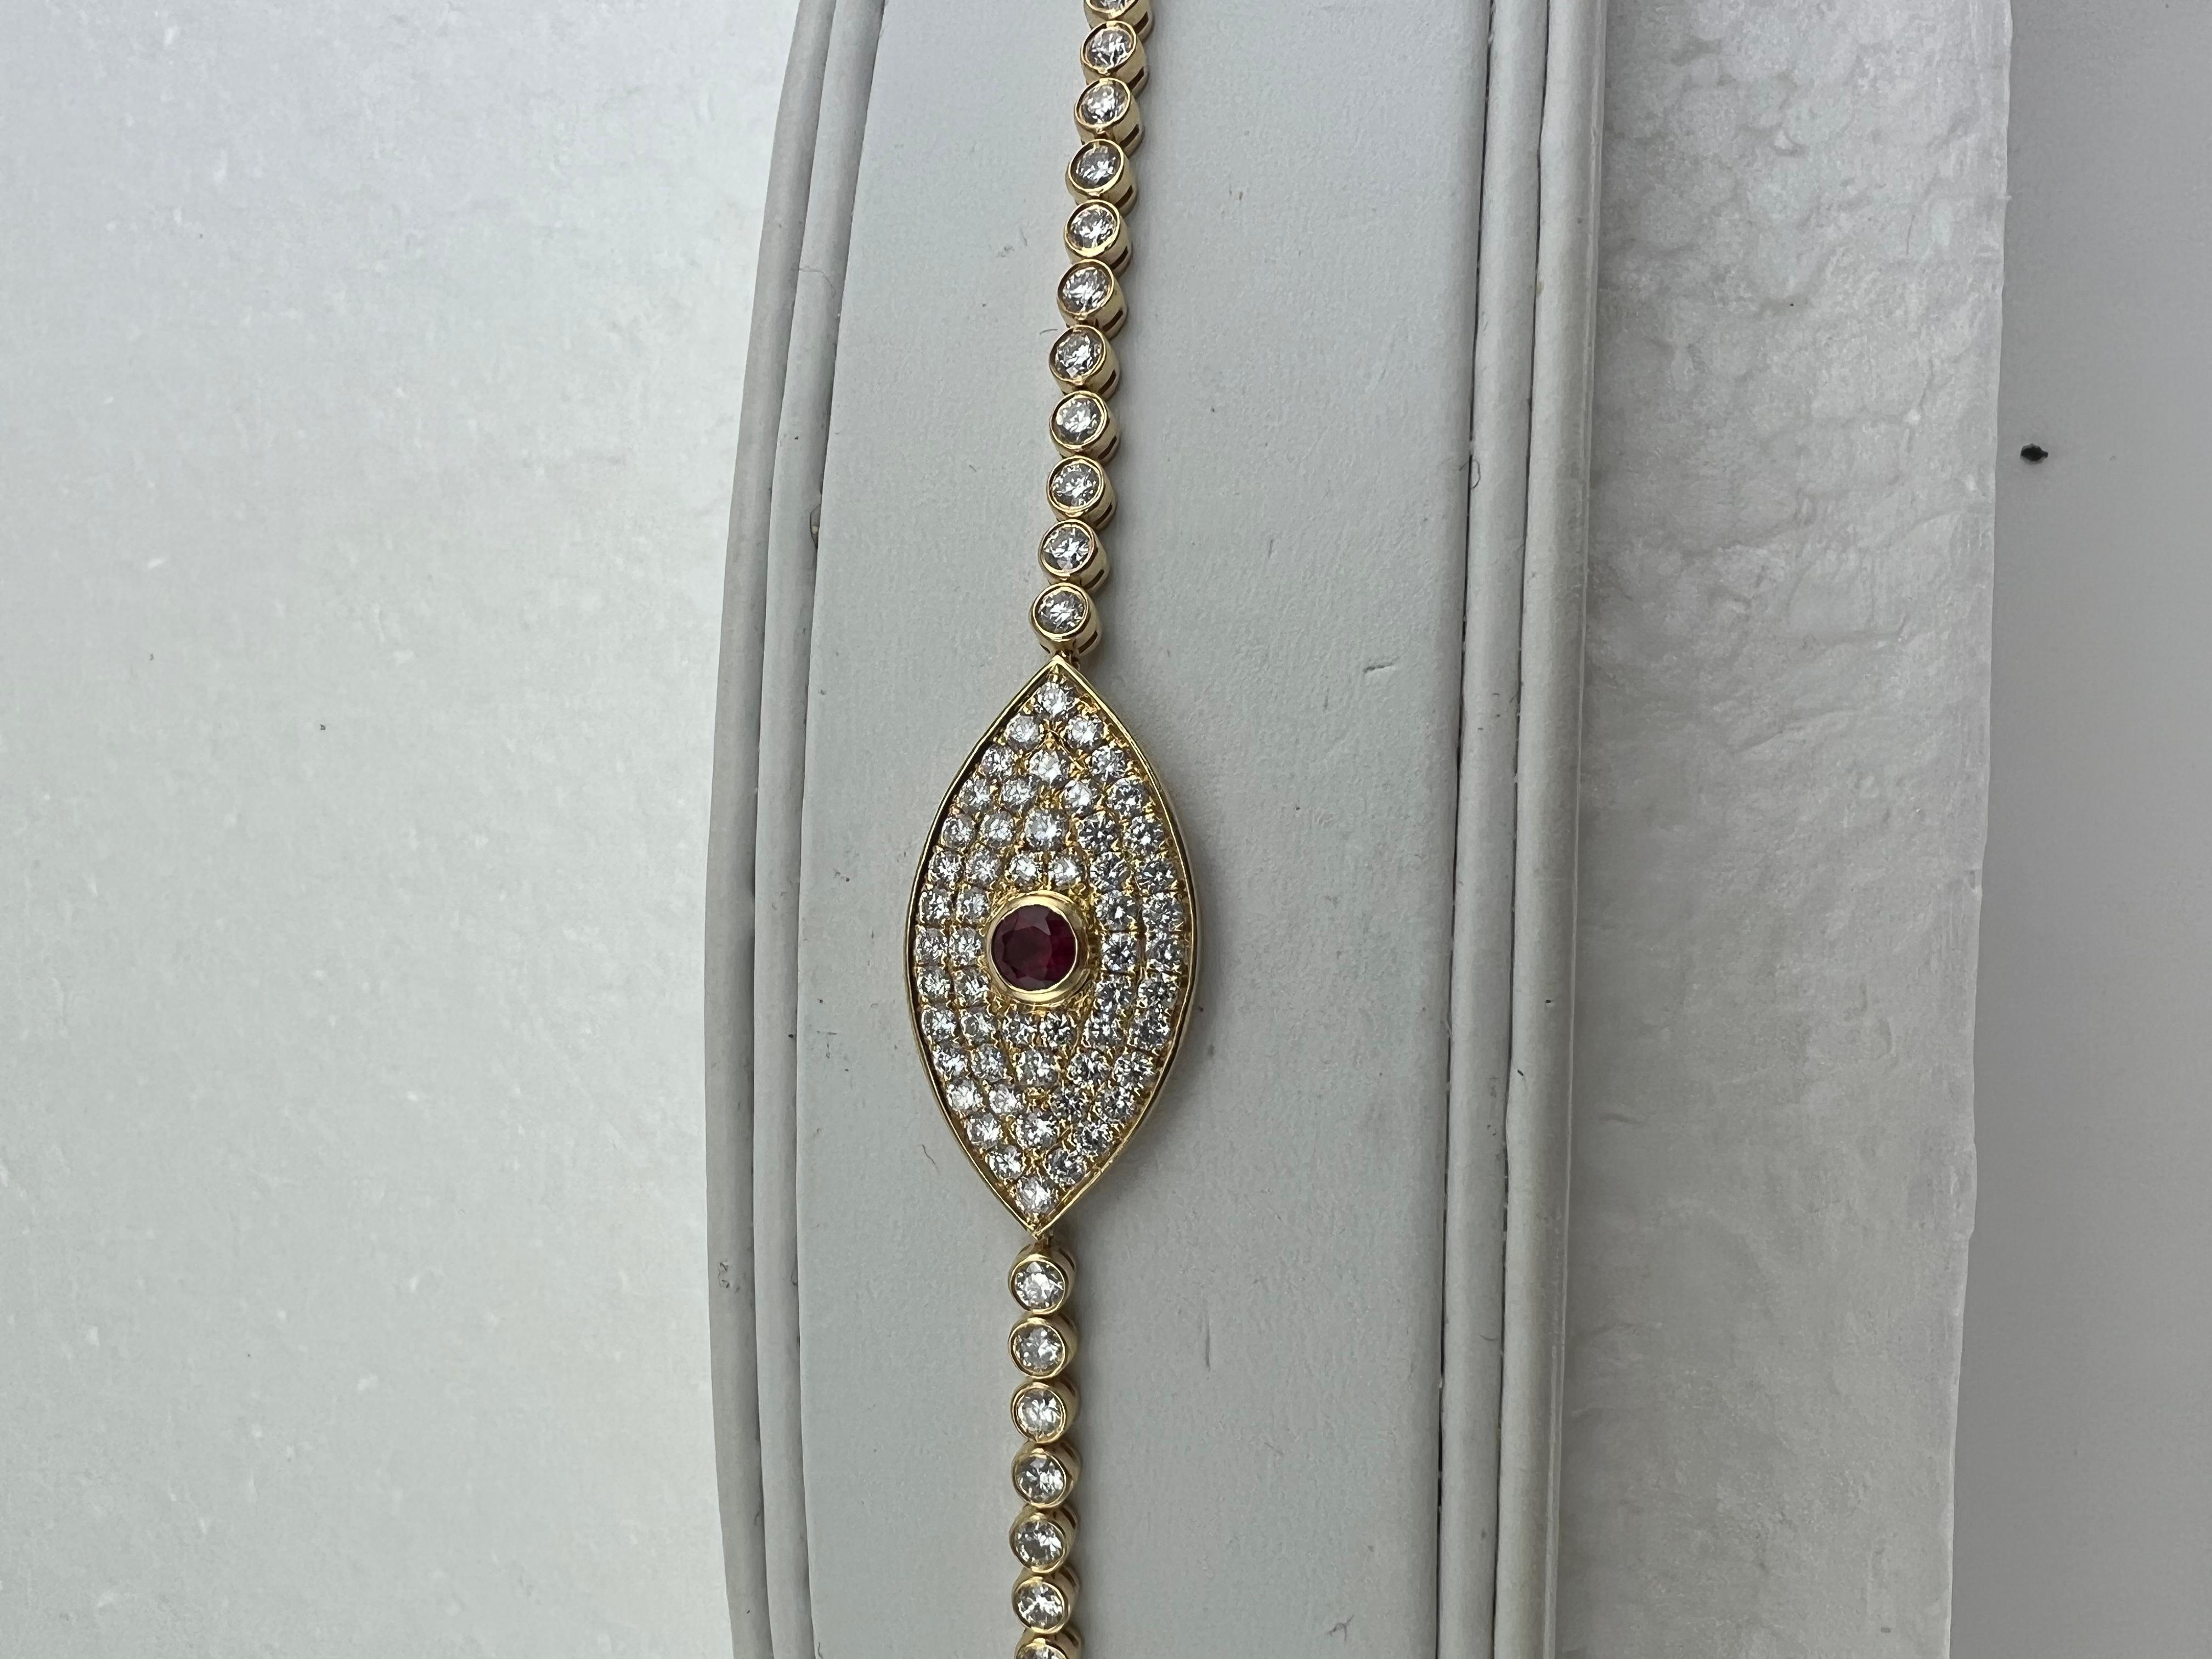 Evil eye amulet diamond ruby yellow gold

   This is a very special bracelet, well made.  It is meant to fit snugger on the wrist than other diamond bracelets so that the center evil eye amulet sits at the top of the wrist.

SPECIFICATIONS:

STONES: